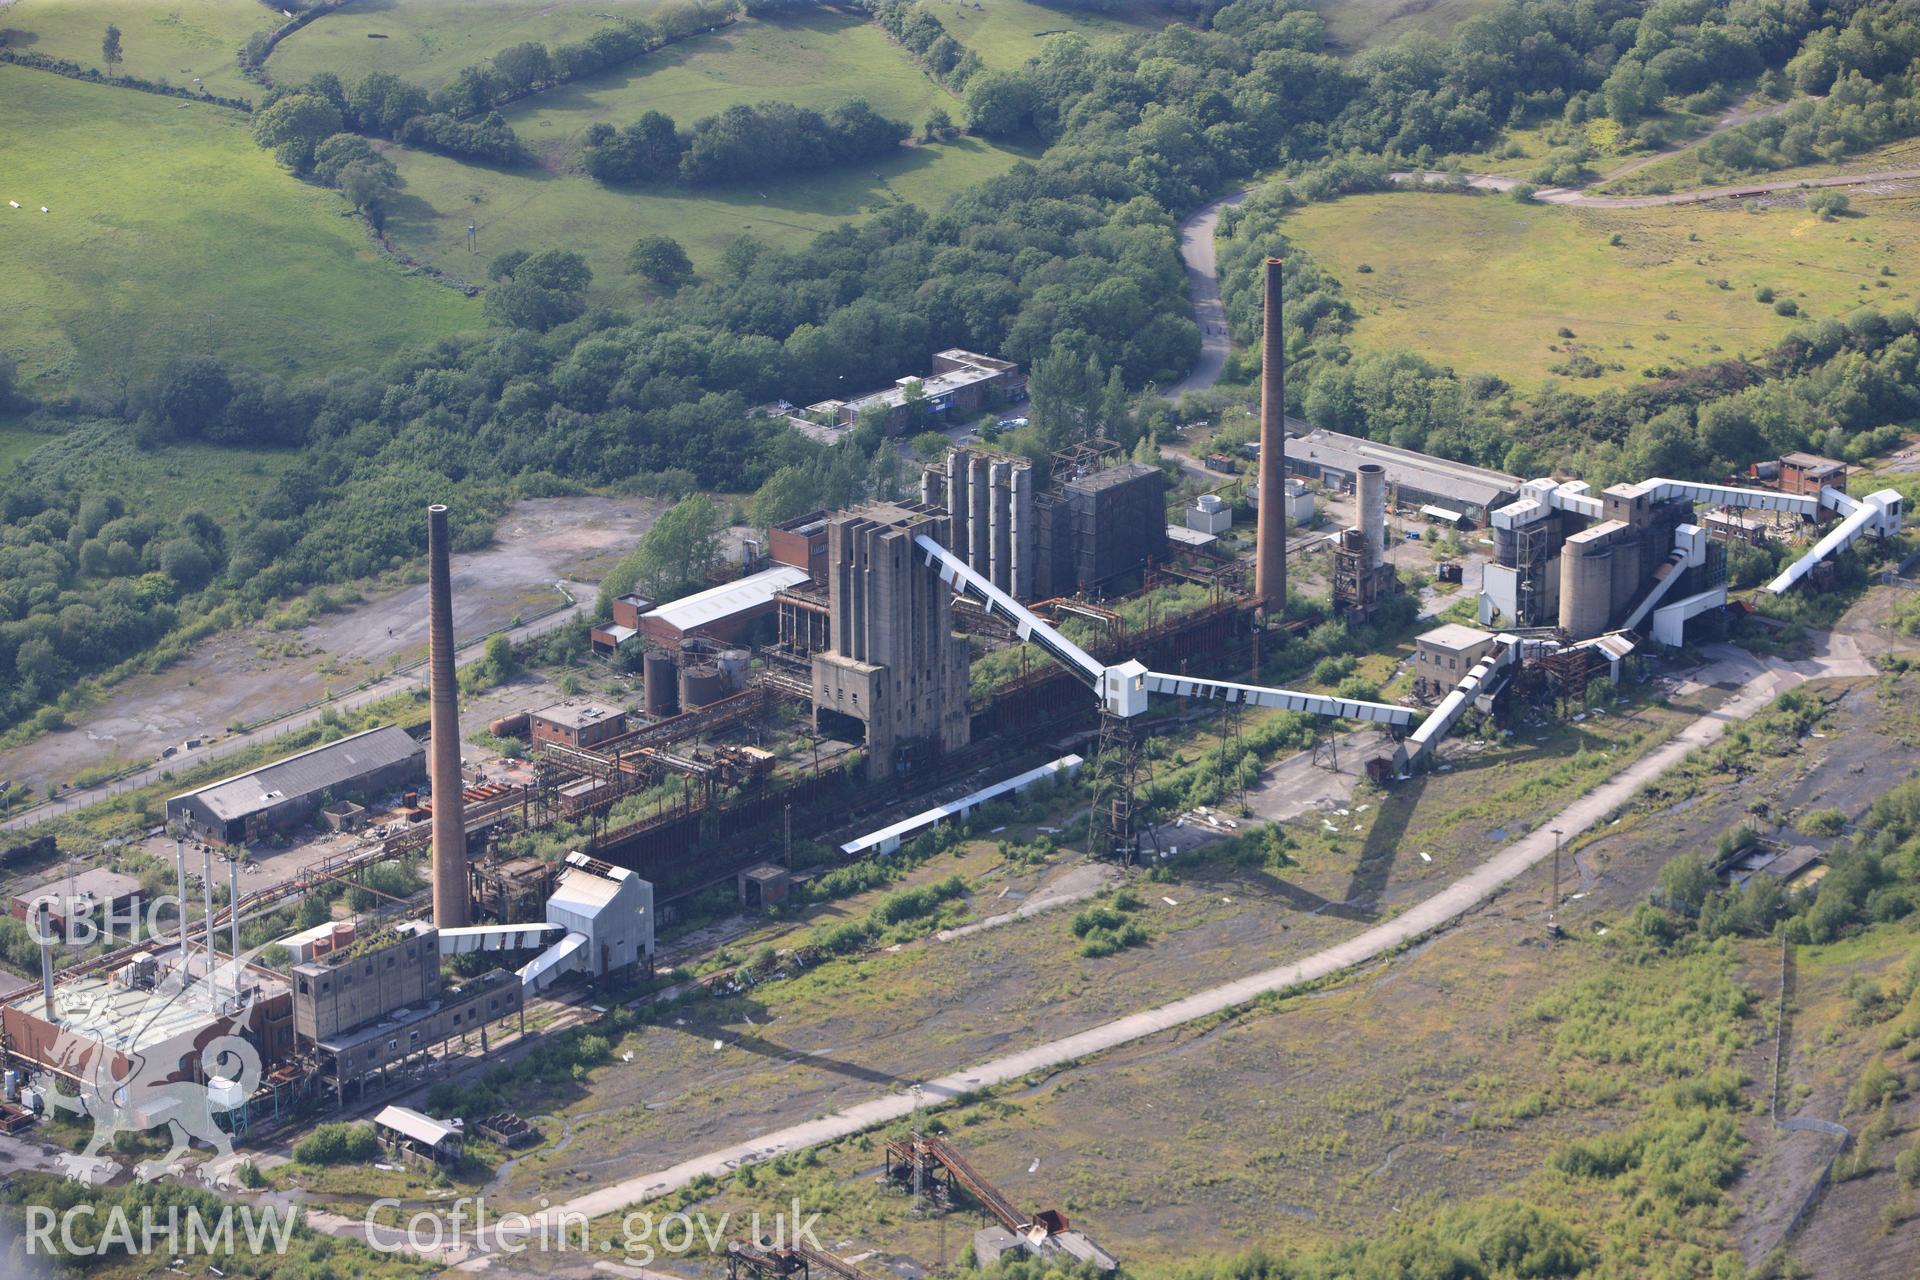 RCAHMW colour oblique photograph of Cwm Coking works, Llantwit Fardre. Taken by Toby Driver on 13/06/2011.